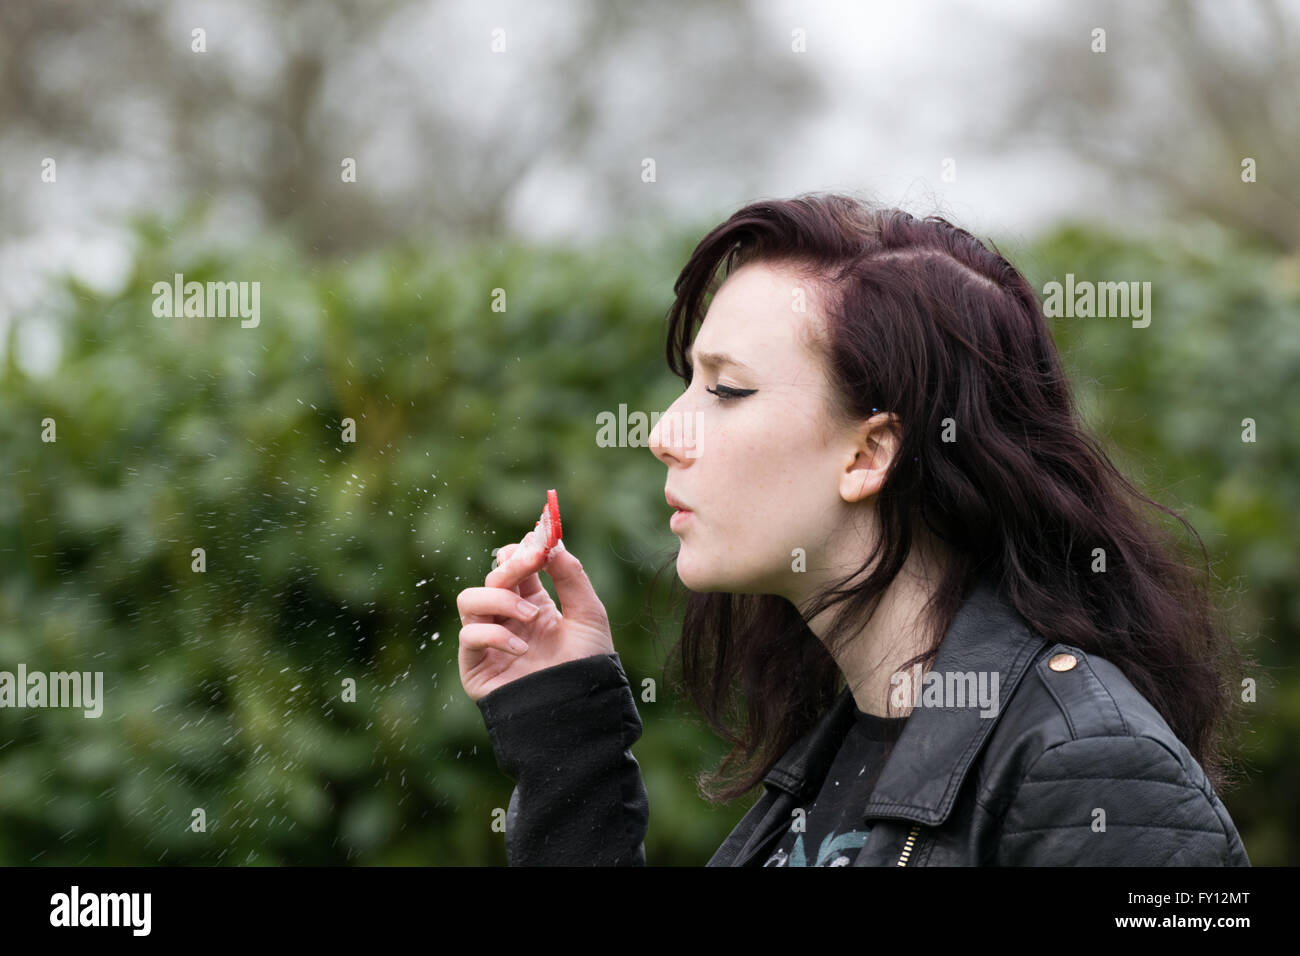 Teenager girl in leather jacket attempts to blow bubbles Stock Photo